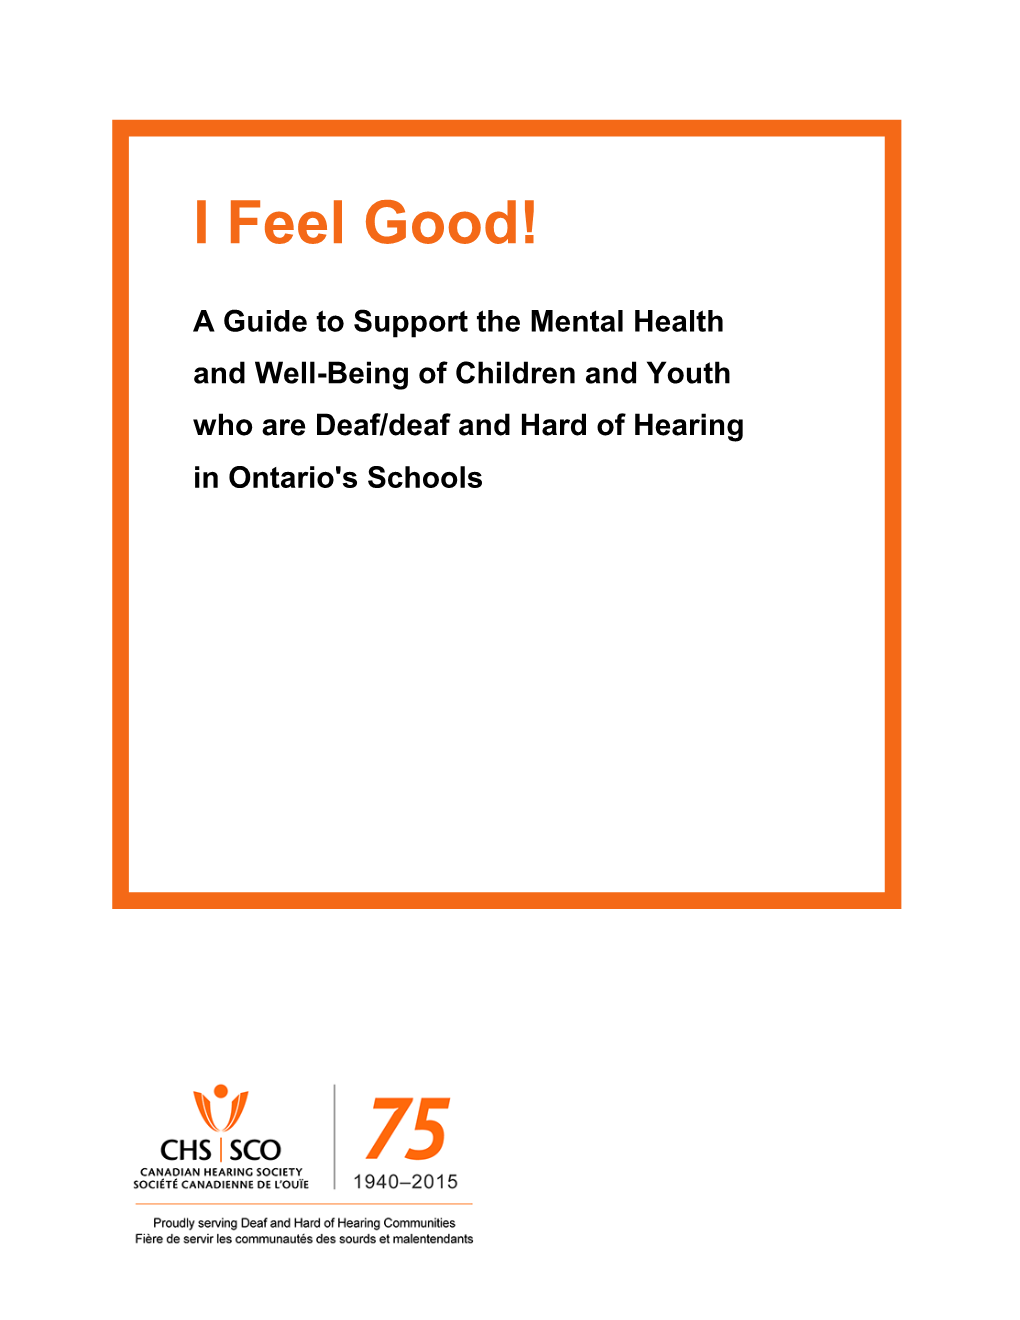 A Guide to Support Mental Health and Well-Being of Children and Youth